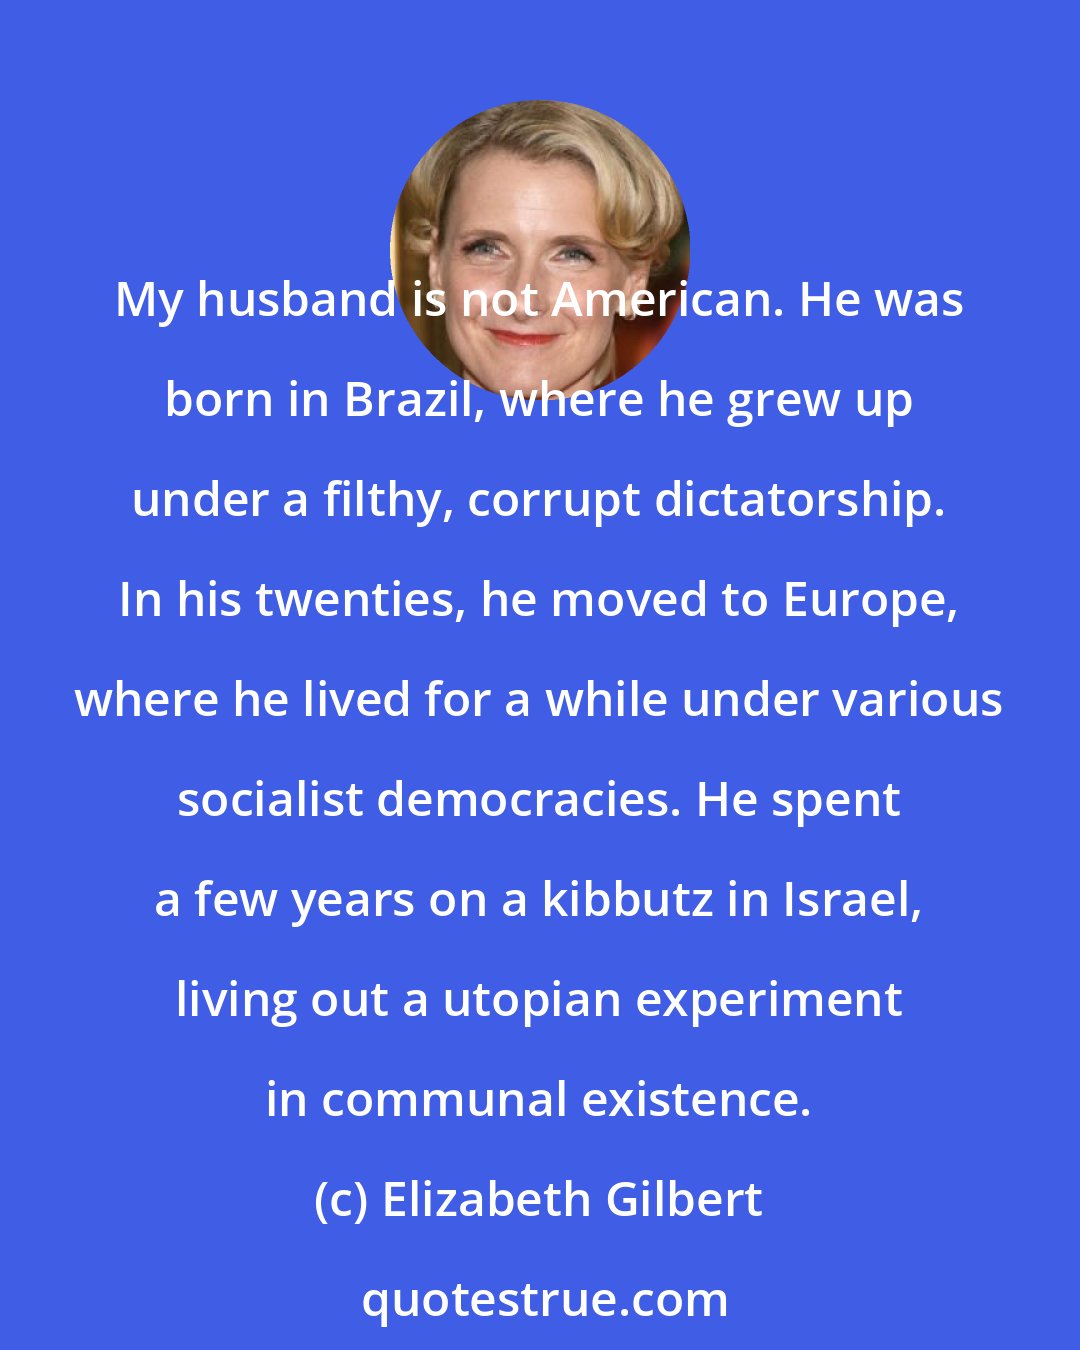 Elizabeth Gilbert: My husband is not American. He was born in Brazil, where he grew up under a filthy, corrupt dictatorship. In his twenties, he moved to Europe, where he lived for a while under various socialist democracies. He spent a few years on a kibbutz in Israel, living out a utopian experiment in communal existence.